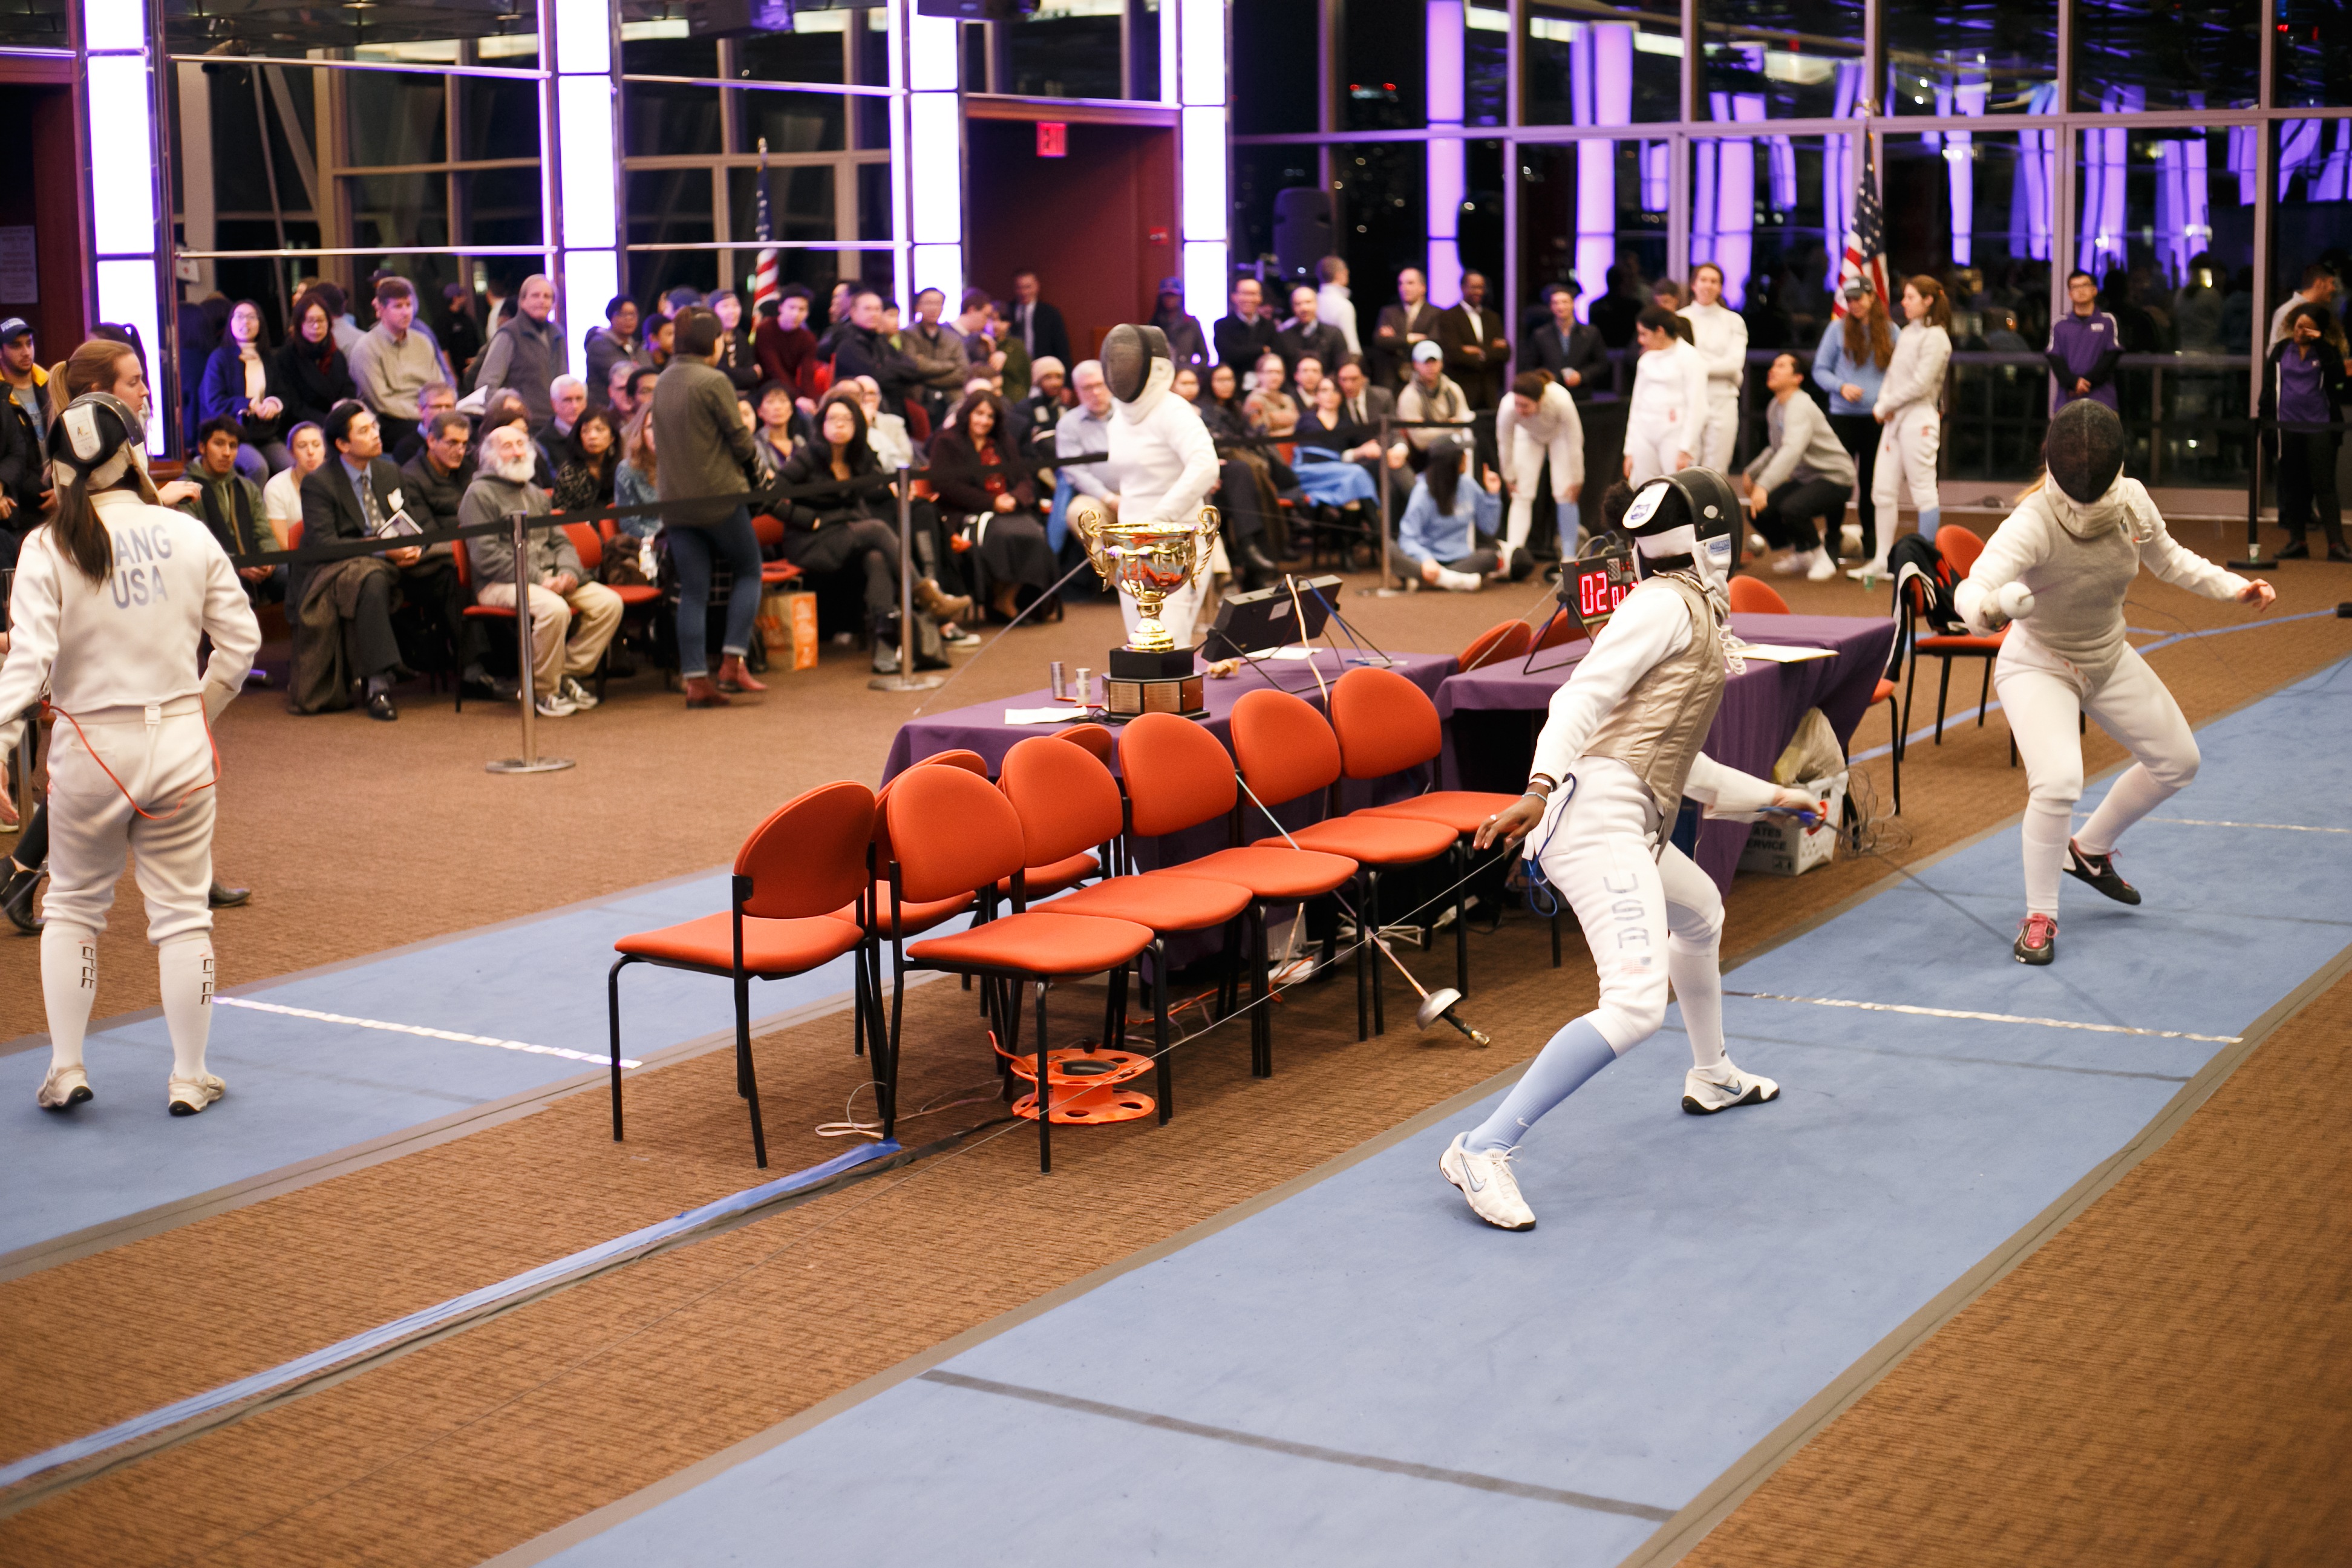 fencers competing